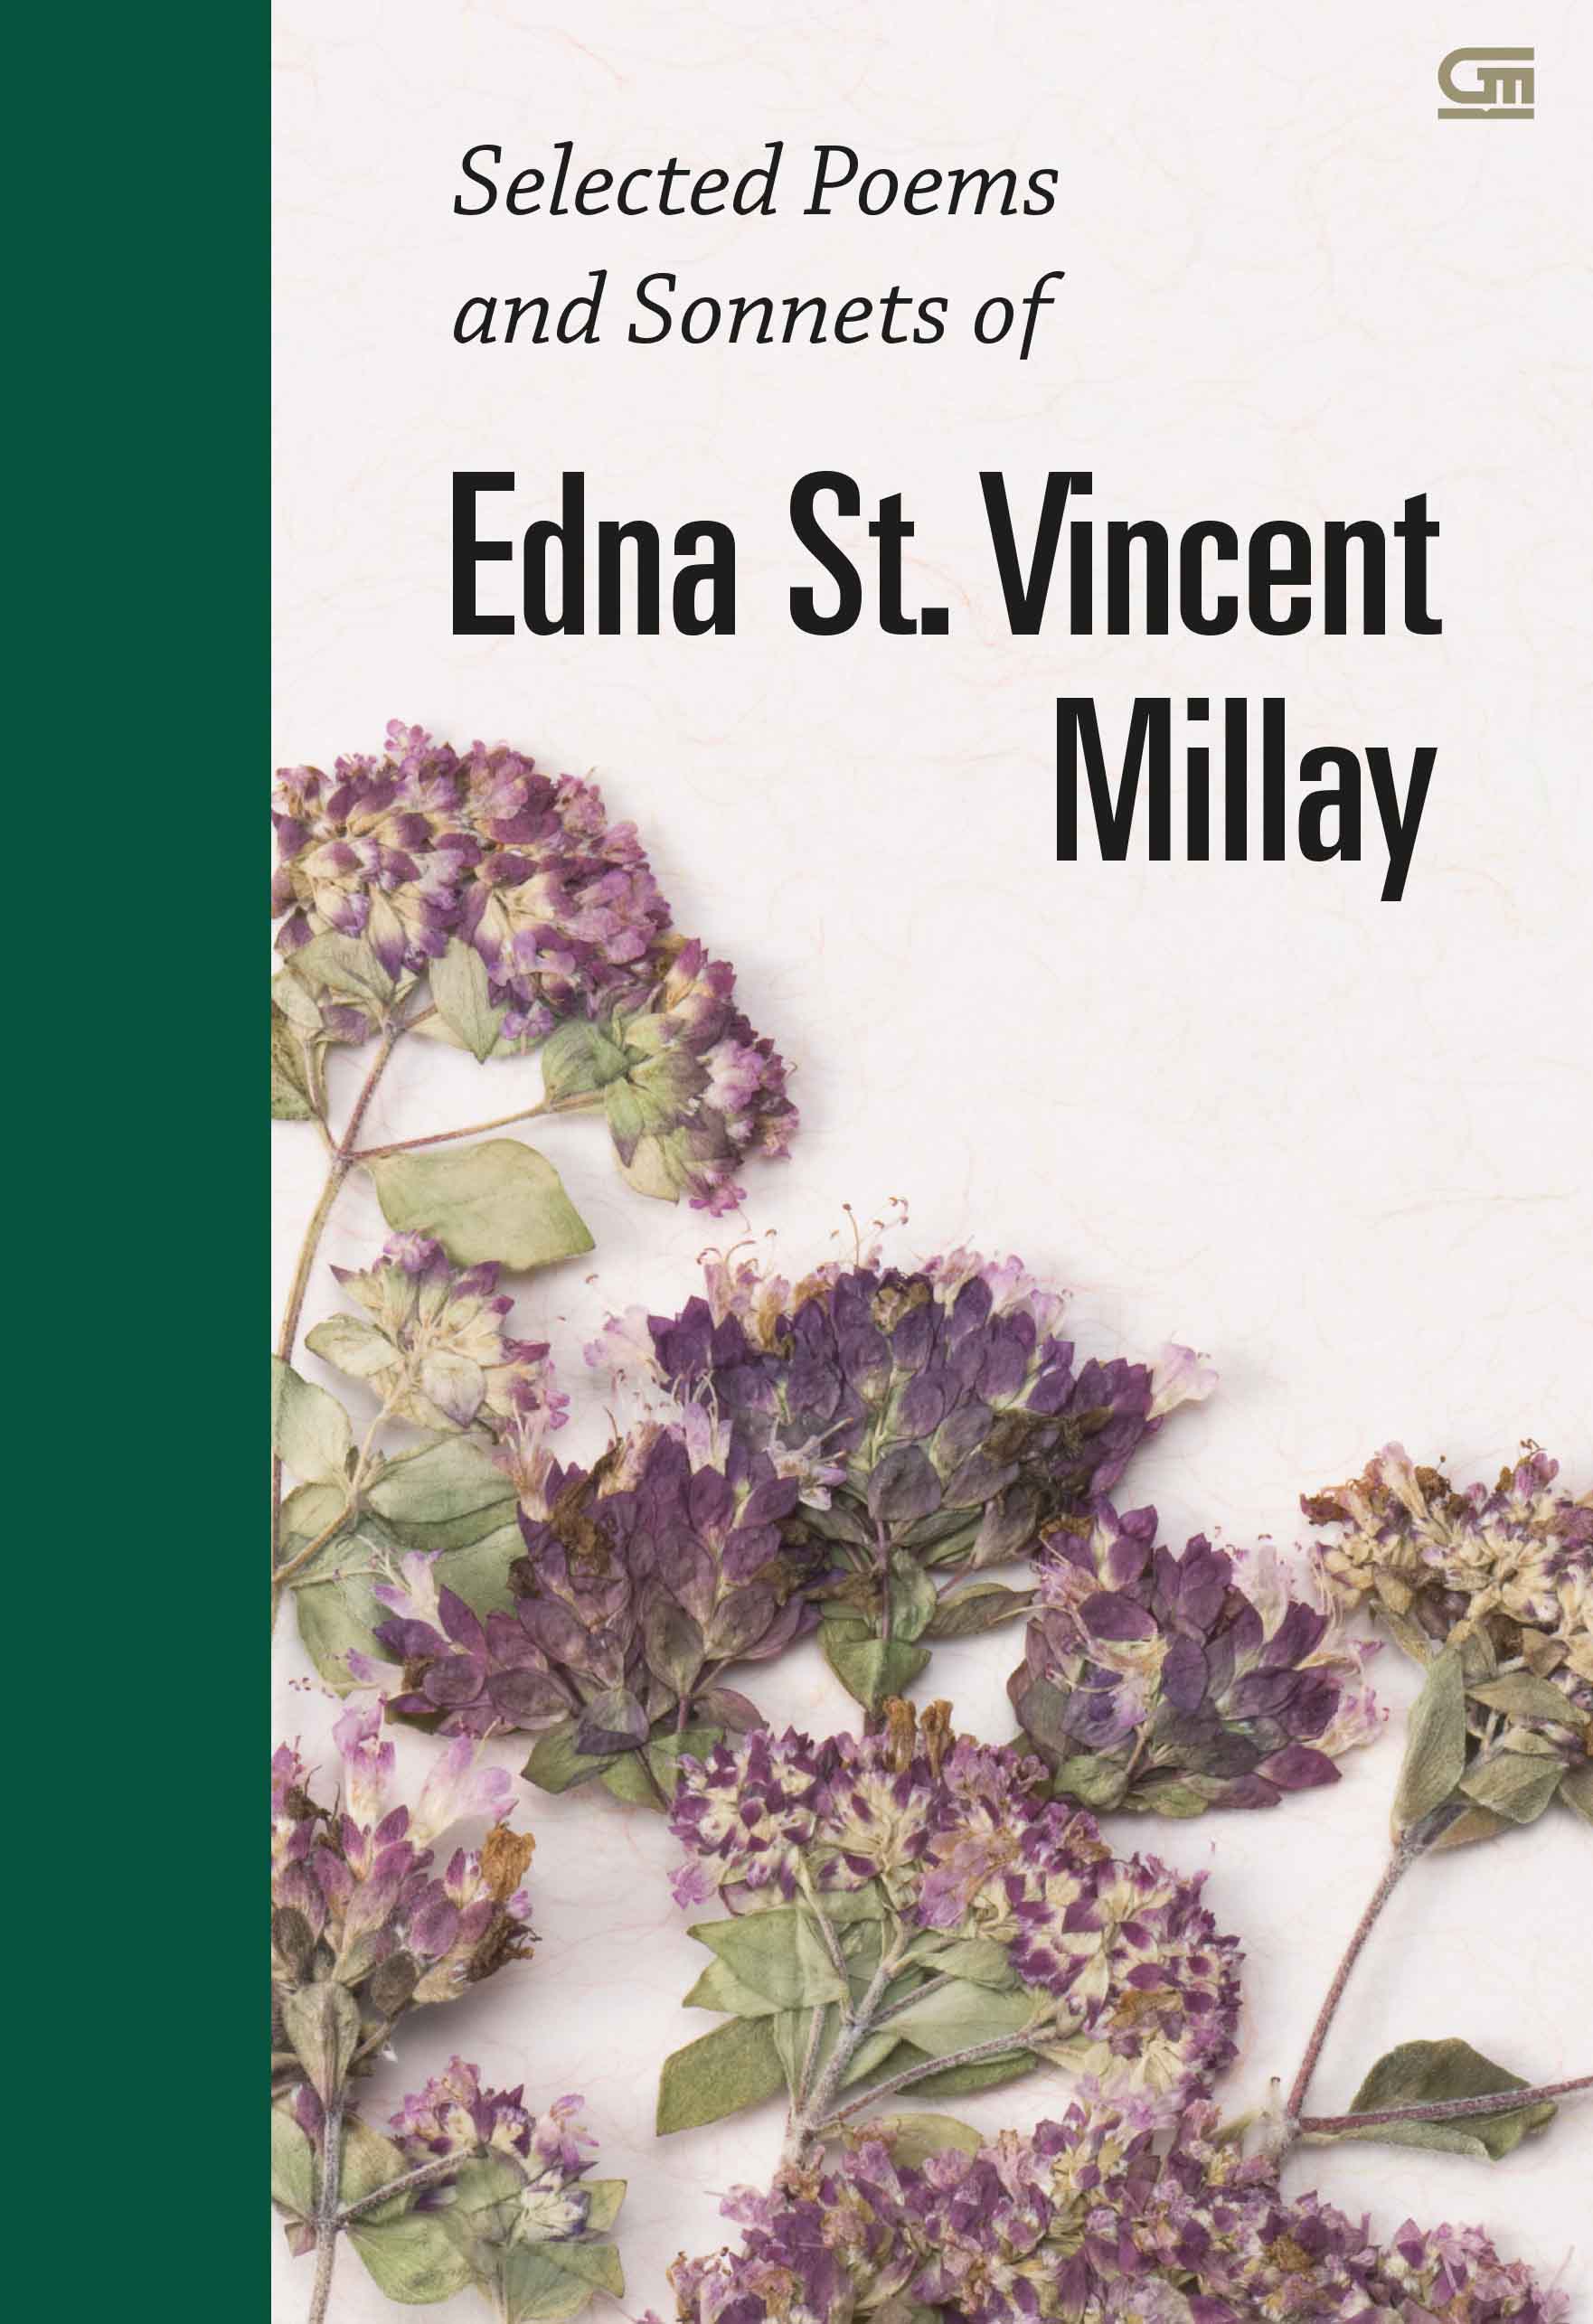 Selected Poems and Sonnets of Edna St. Vincent Millay